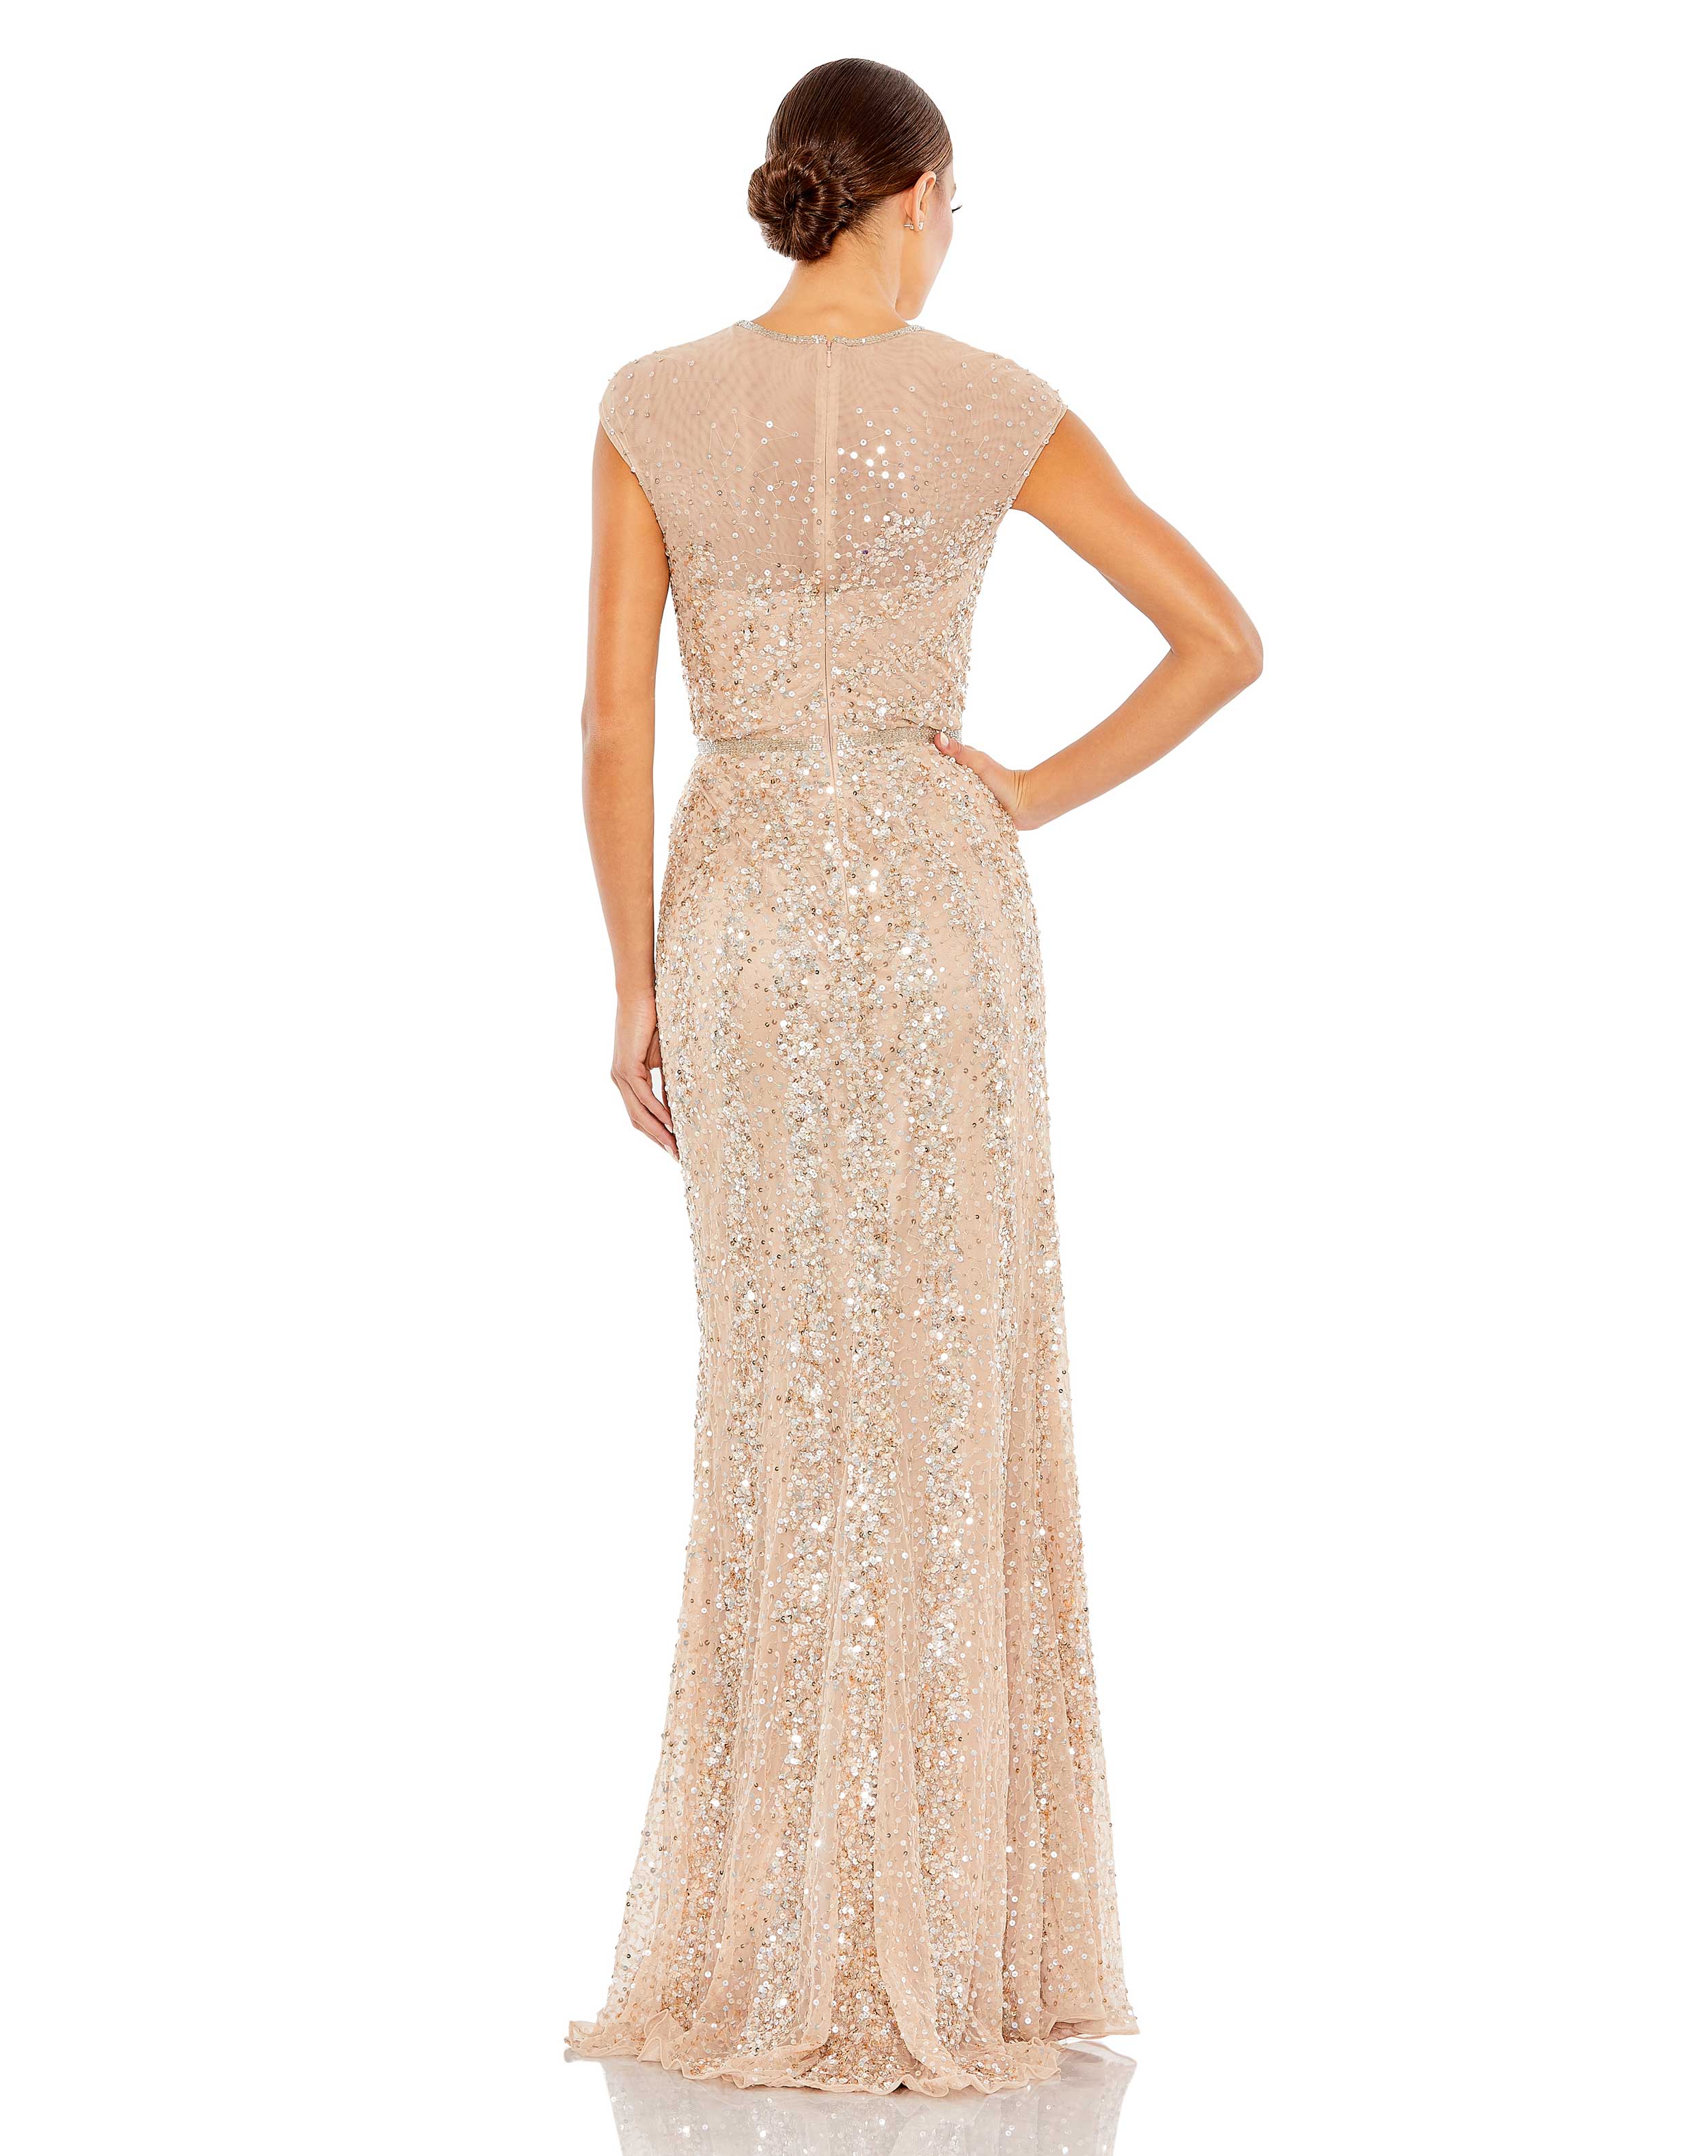 Embellished Illusion High Neck Cap Sleeve Gown